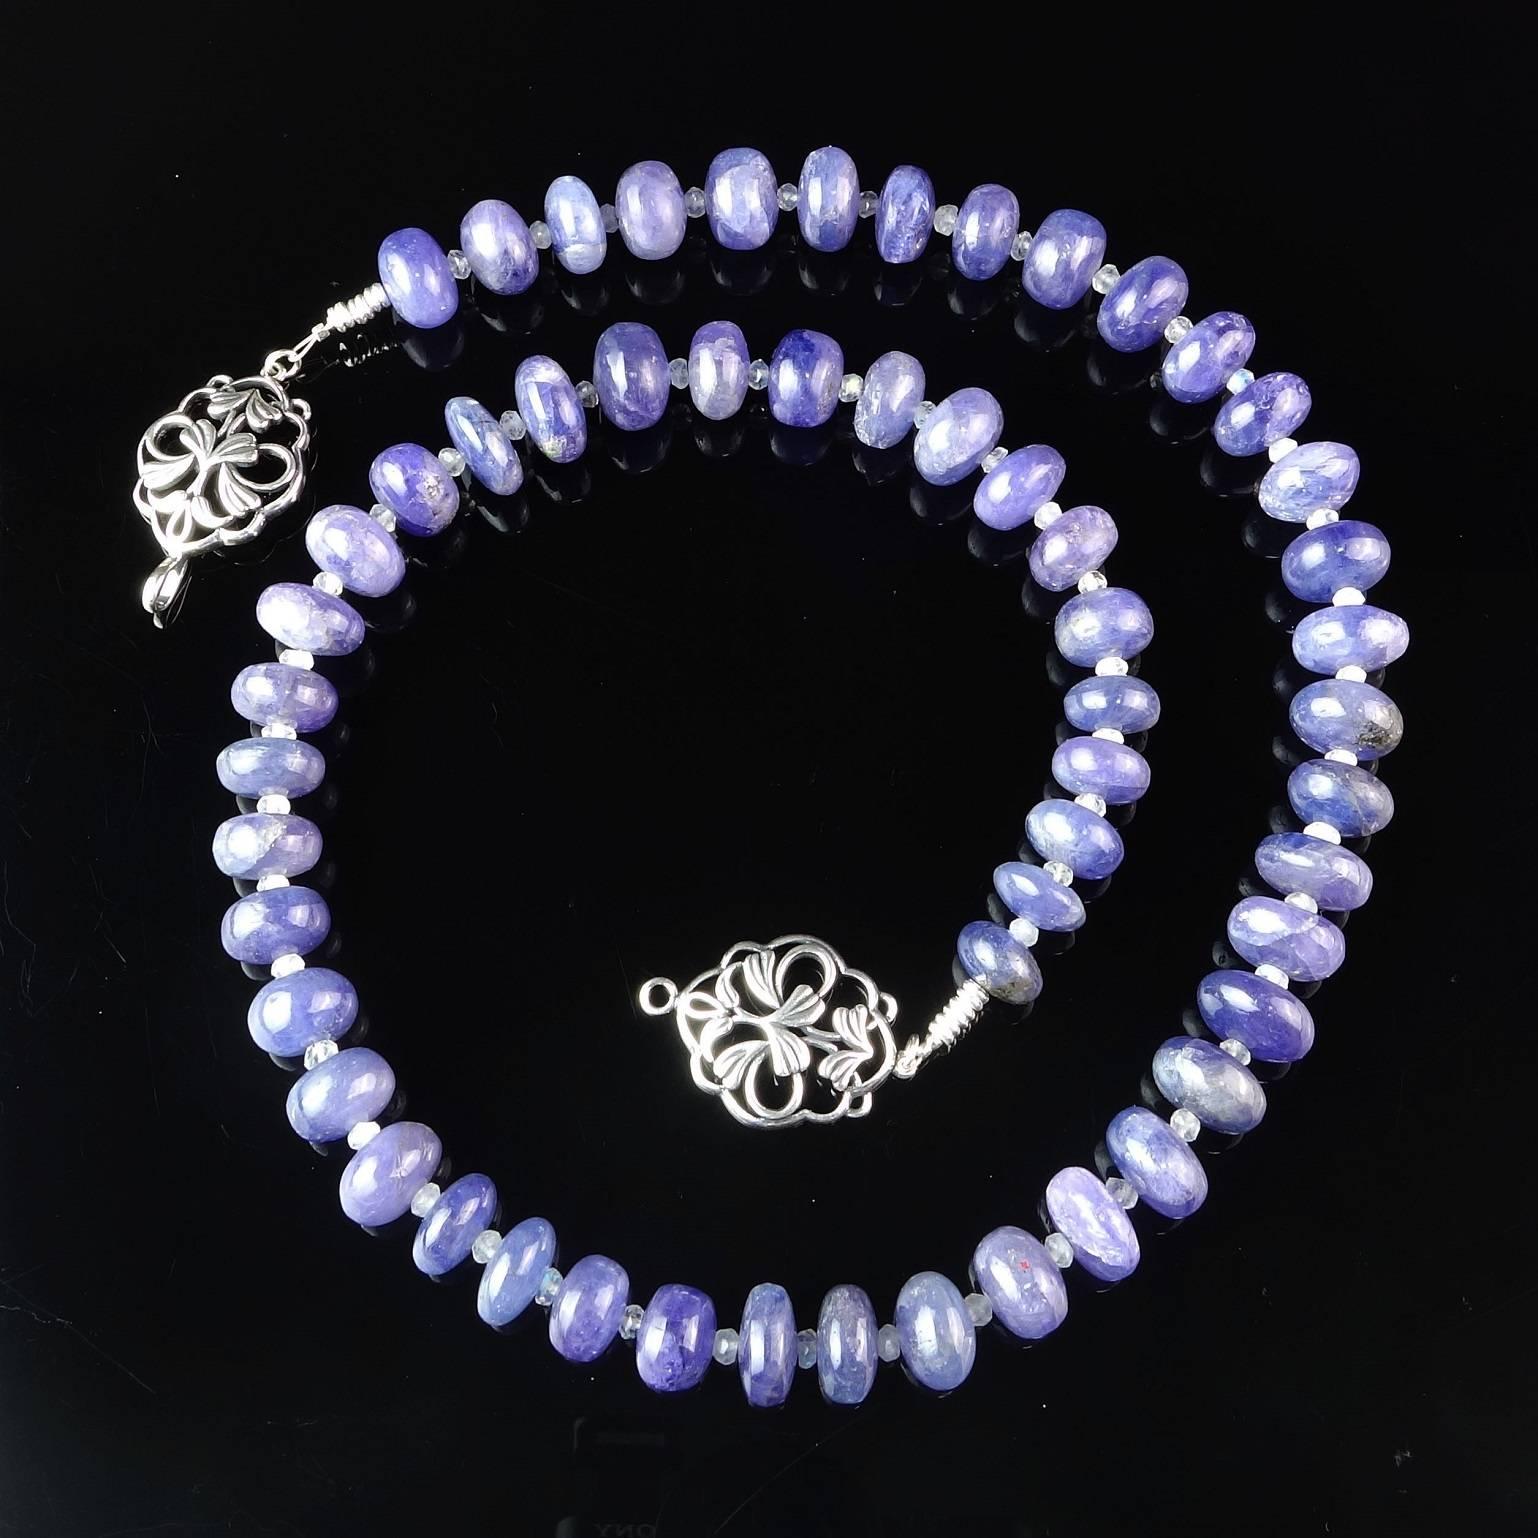 Gorgeous Translucent Tanzanite Rondel Necklace with Sterling Silver Clasp 1